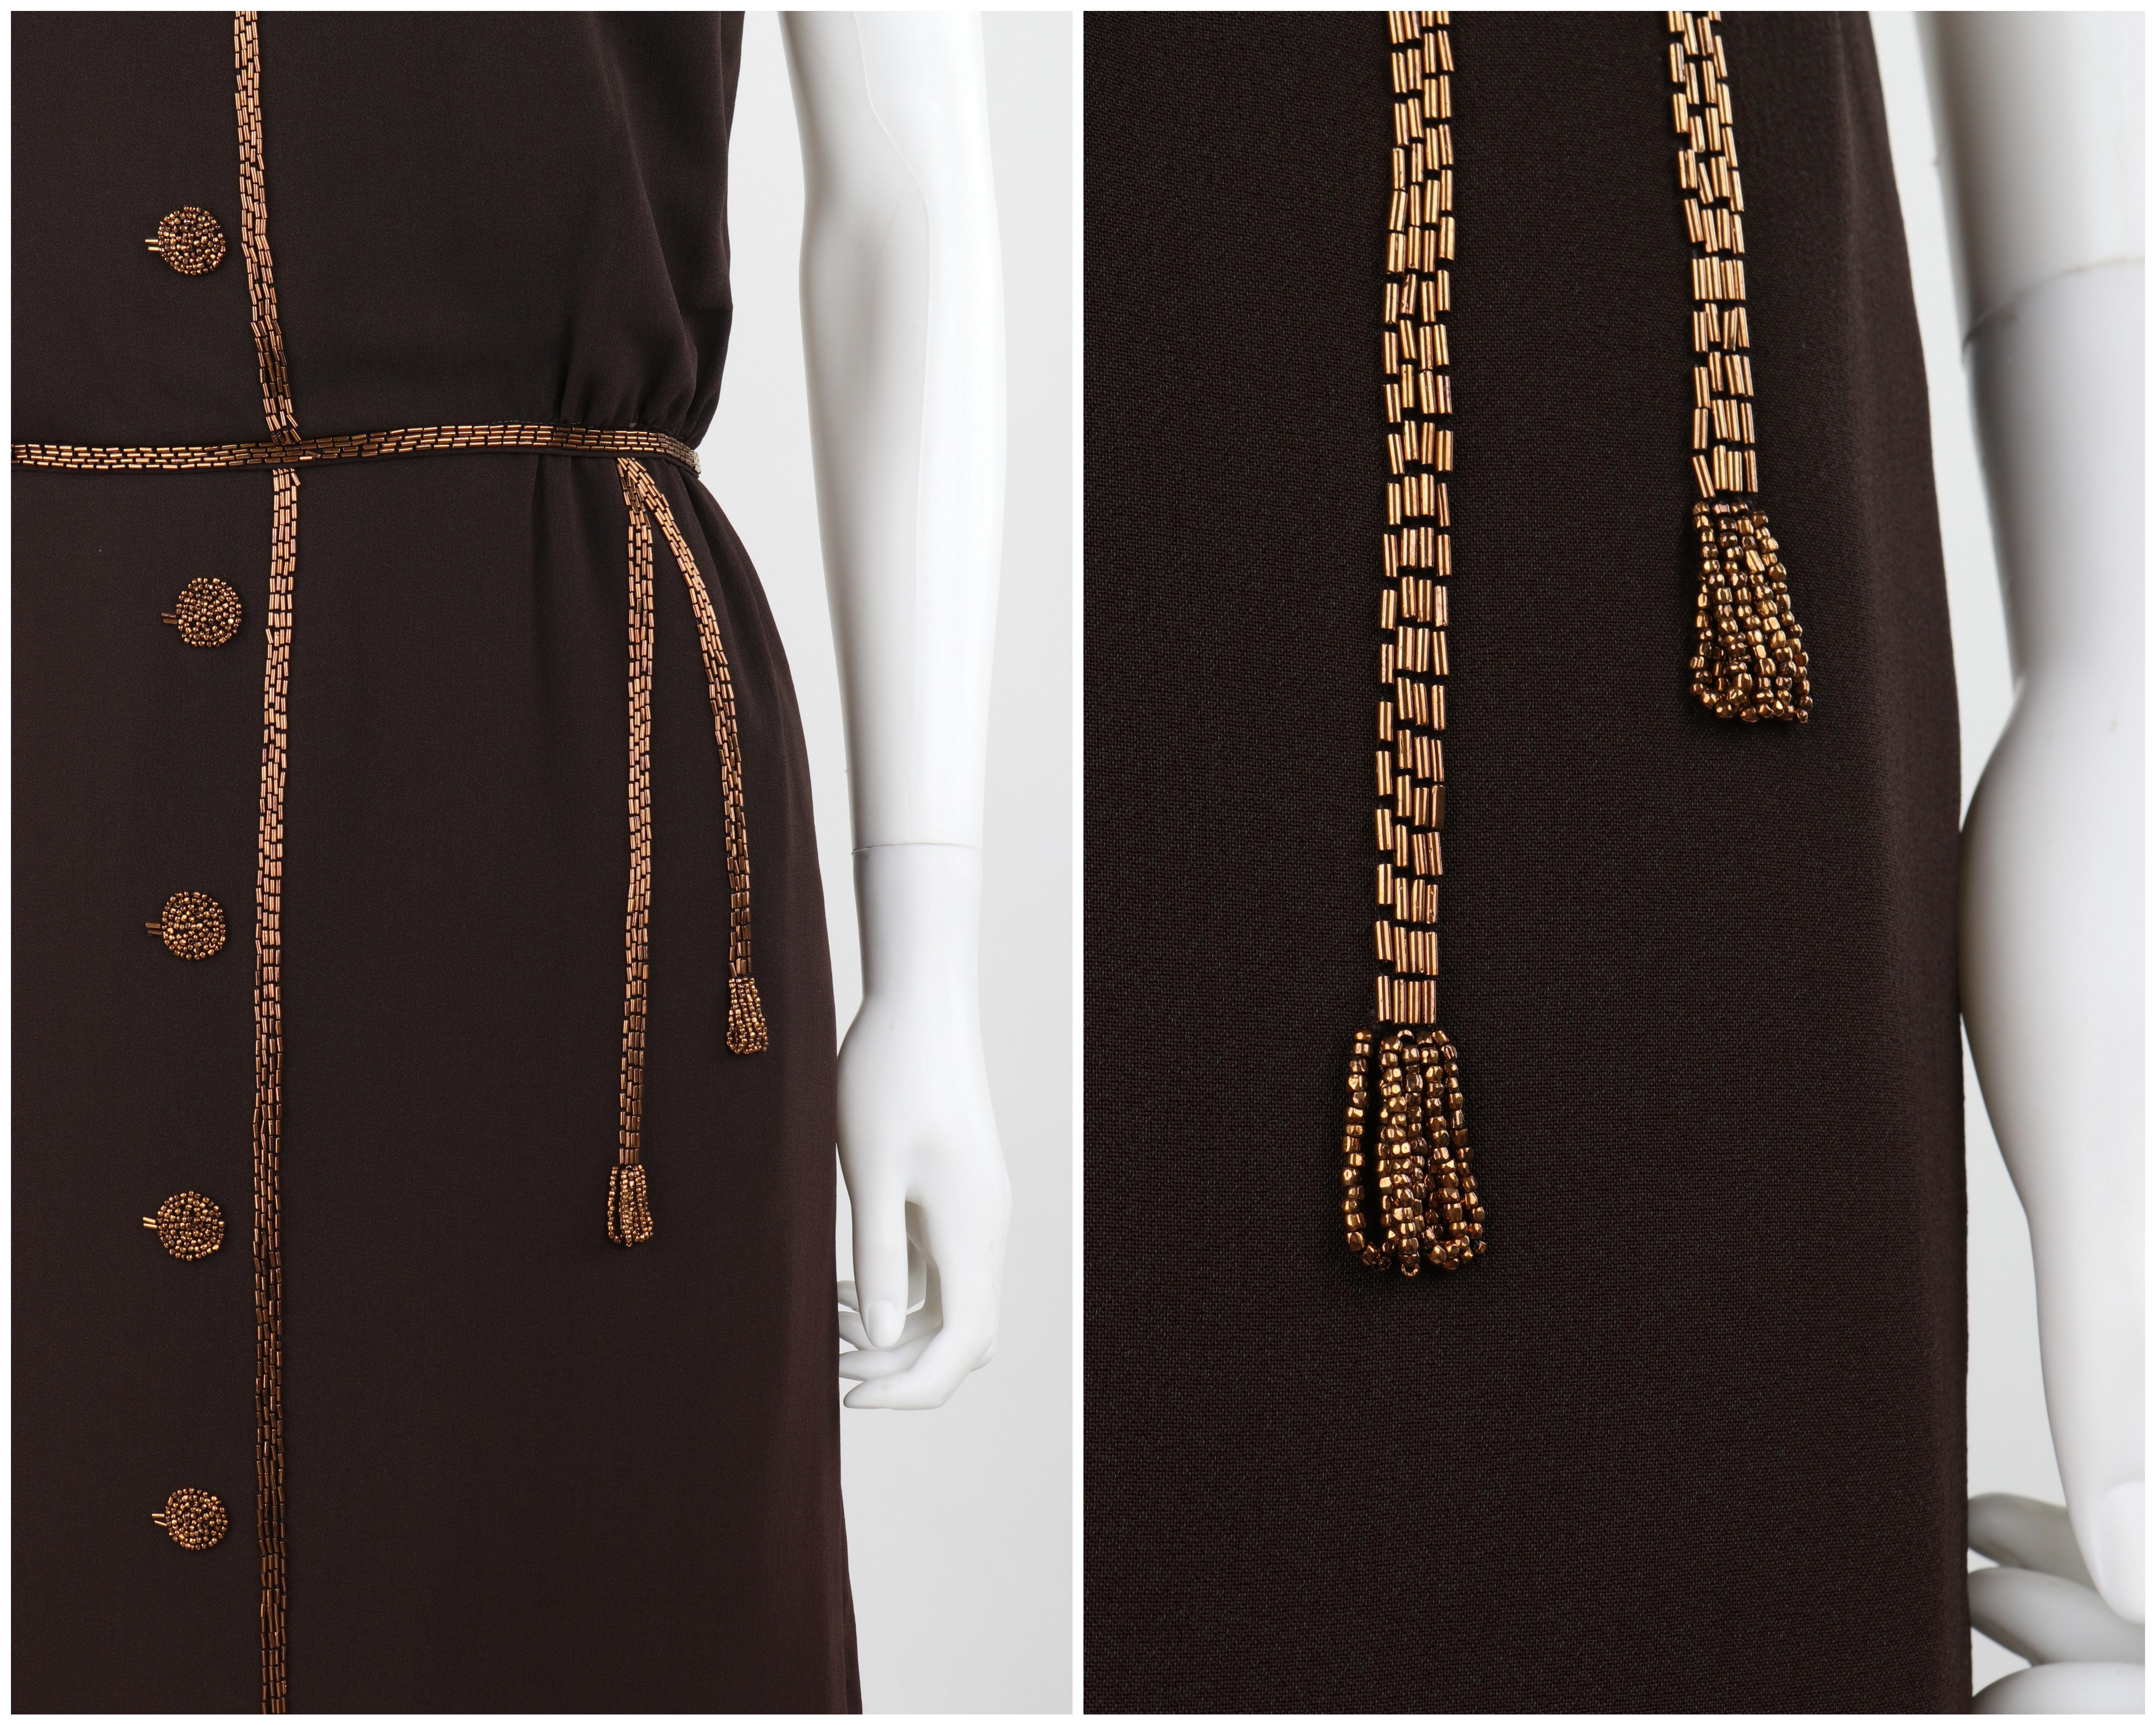 ROBBIE BEE c.1940's Vtg Brown Copper Hand Beaded Accent Trompe-L'oeil Day Dress For Sale 4